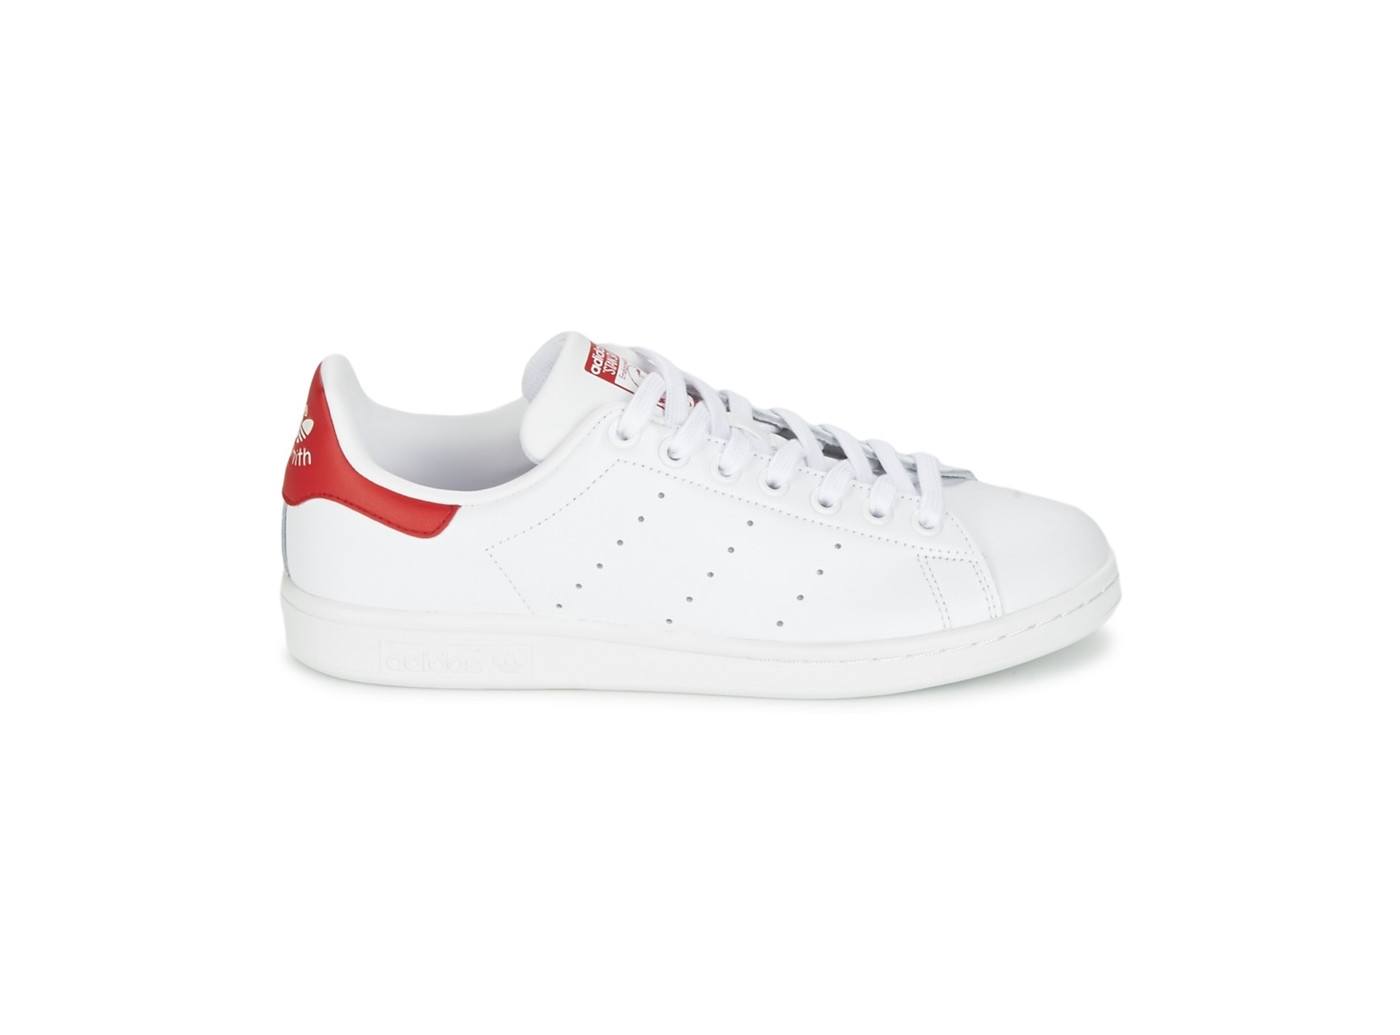 stan smith chaussure